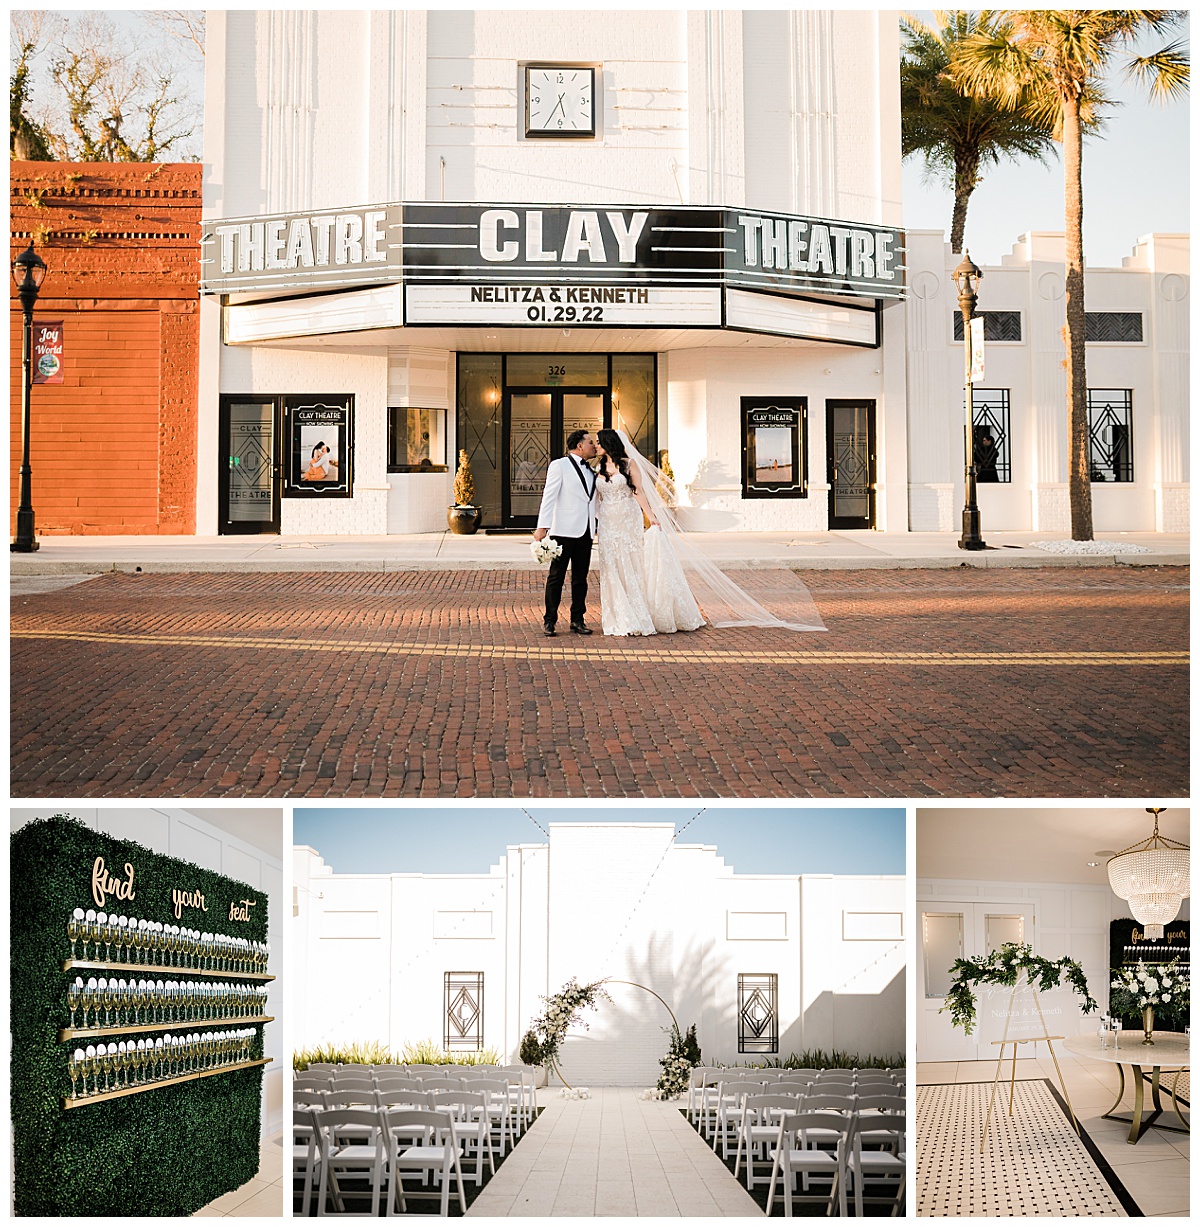 A newlywed couple in a white gown and white tuxedo pose in the early evening in front of The Clay Theatre.